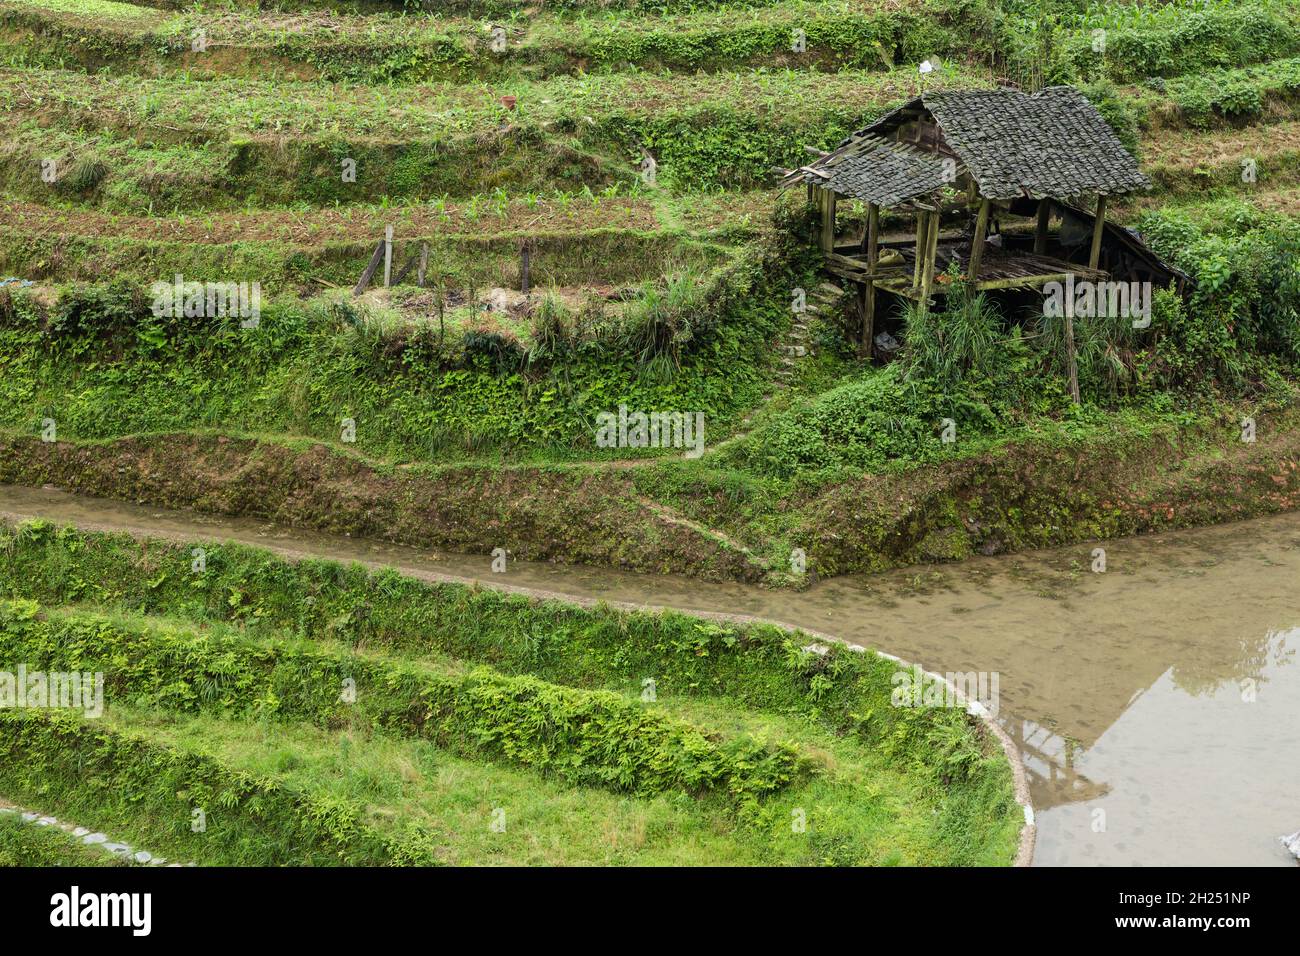 Cornfields & a shelter in the Ping'an terraces of the Longi rice terraces in Longshen, Guanxi, China. Stock Photo